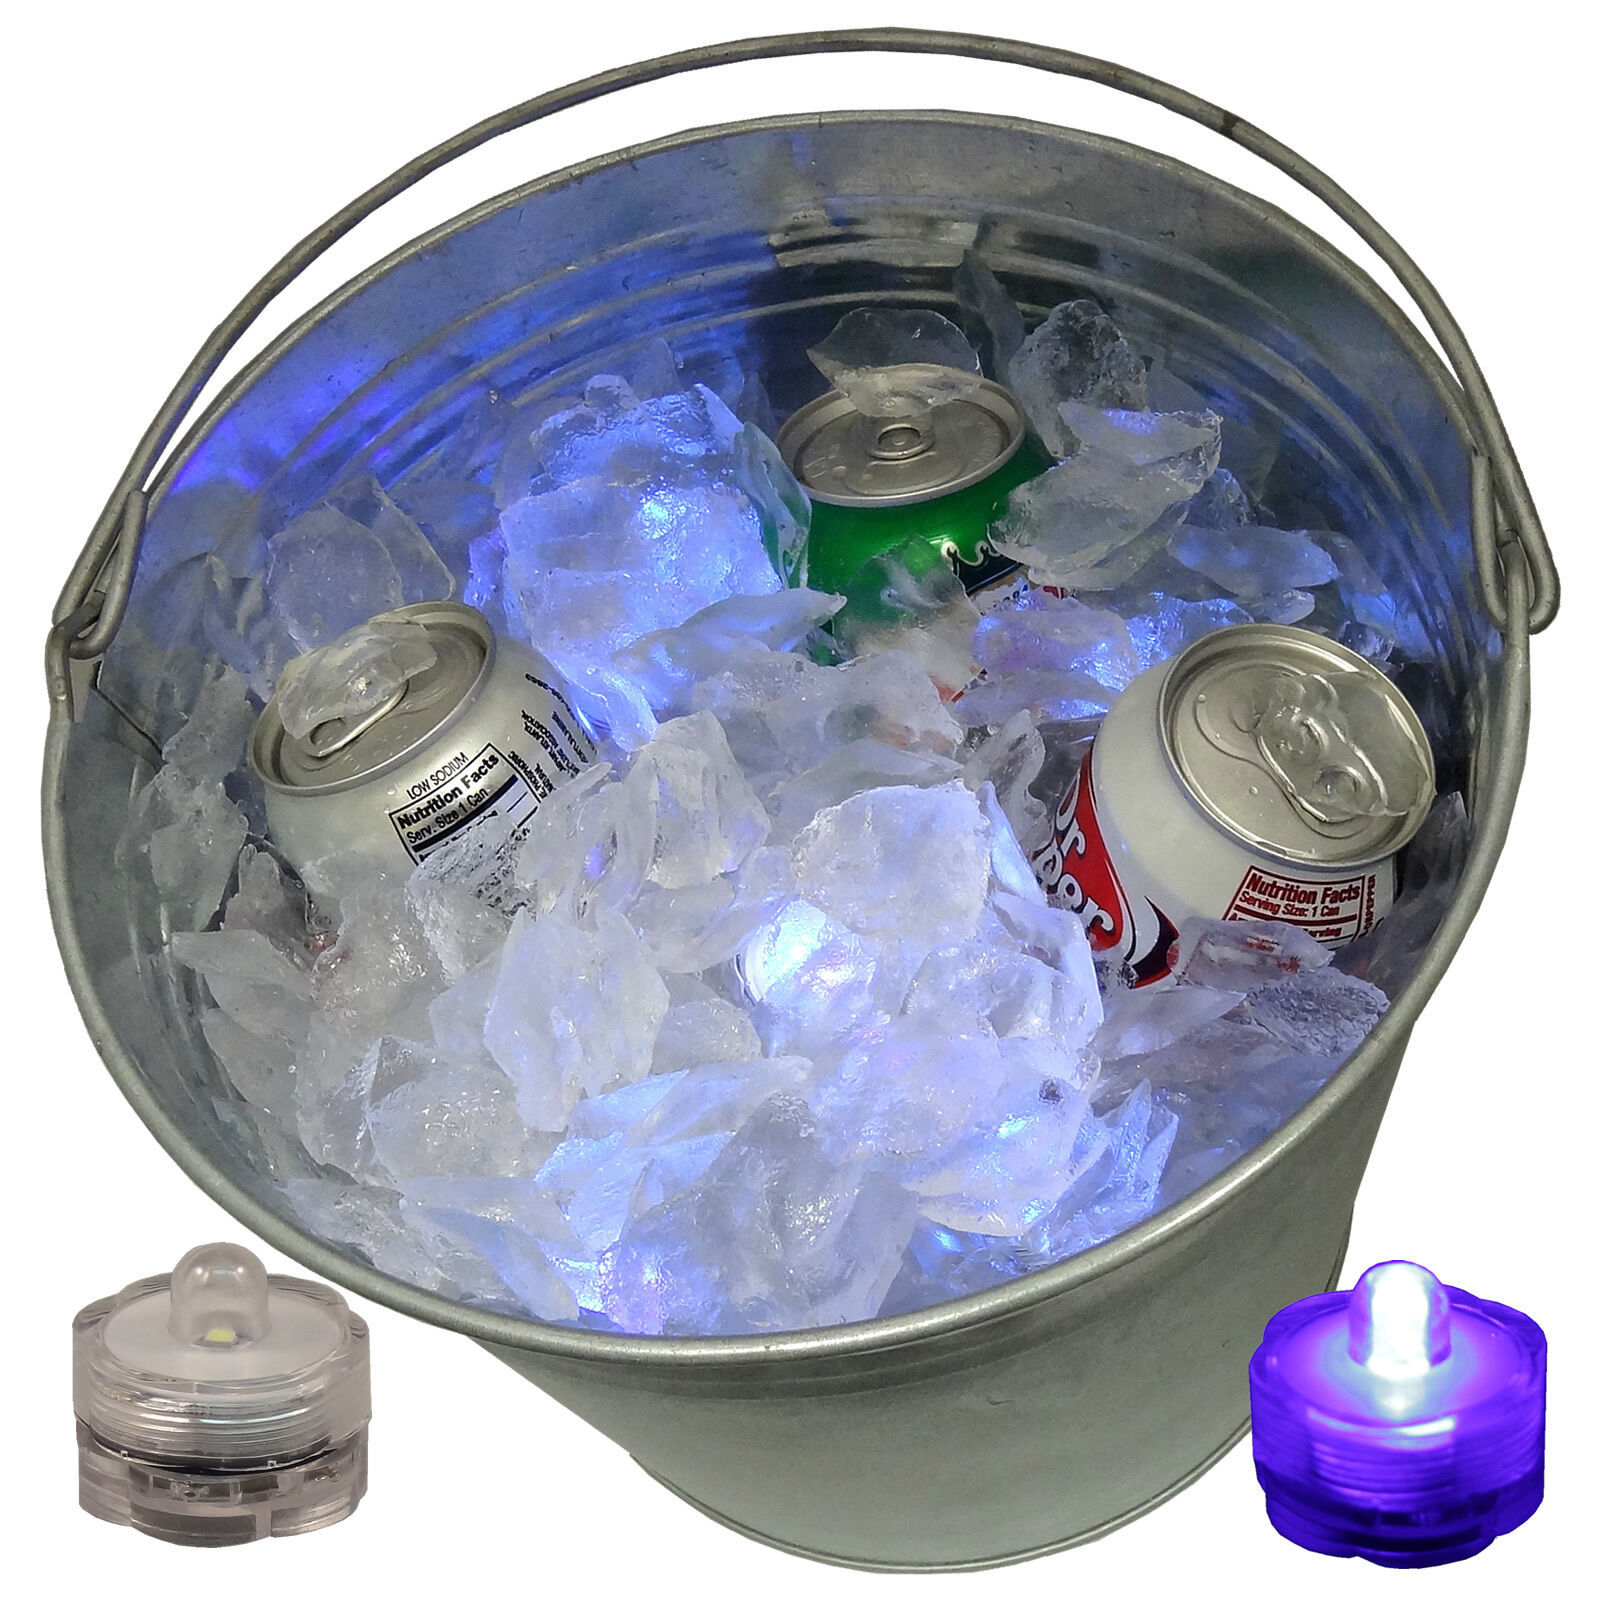 Primary image for WOW Sick Rave Beer Ice Bucket Bright Glow LED Lights Submersible Party 24 Purple